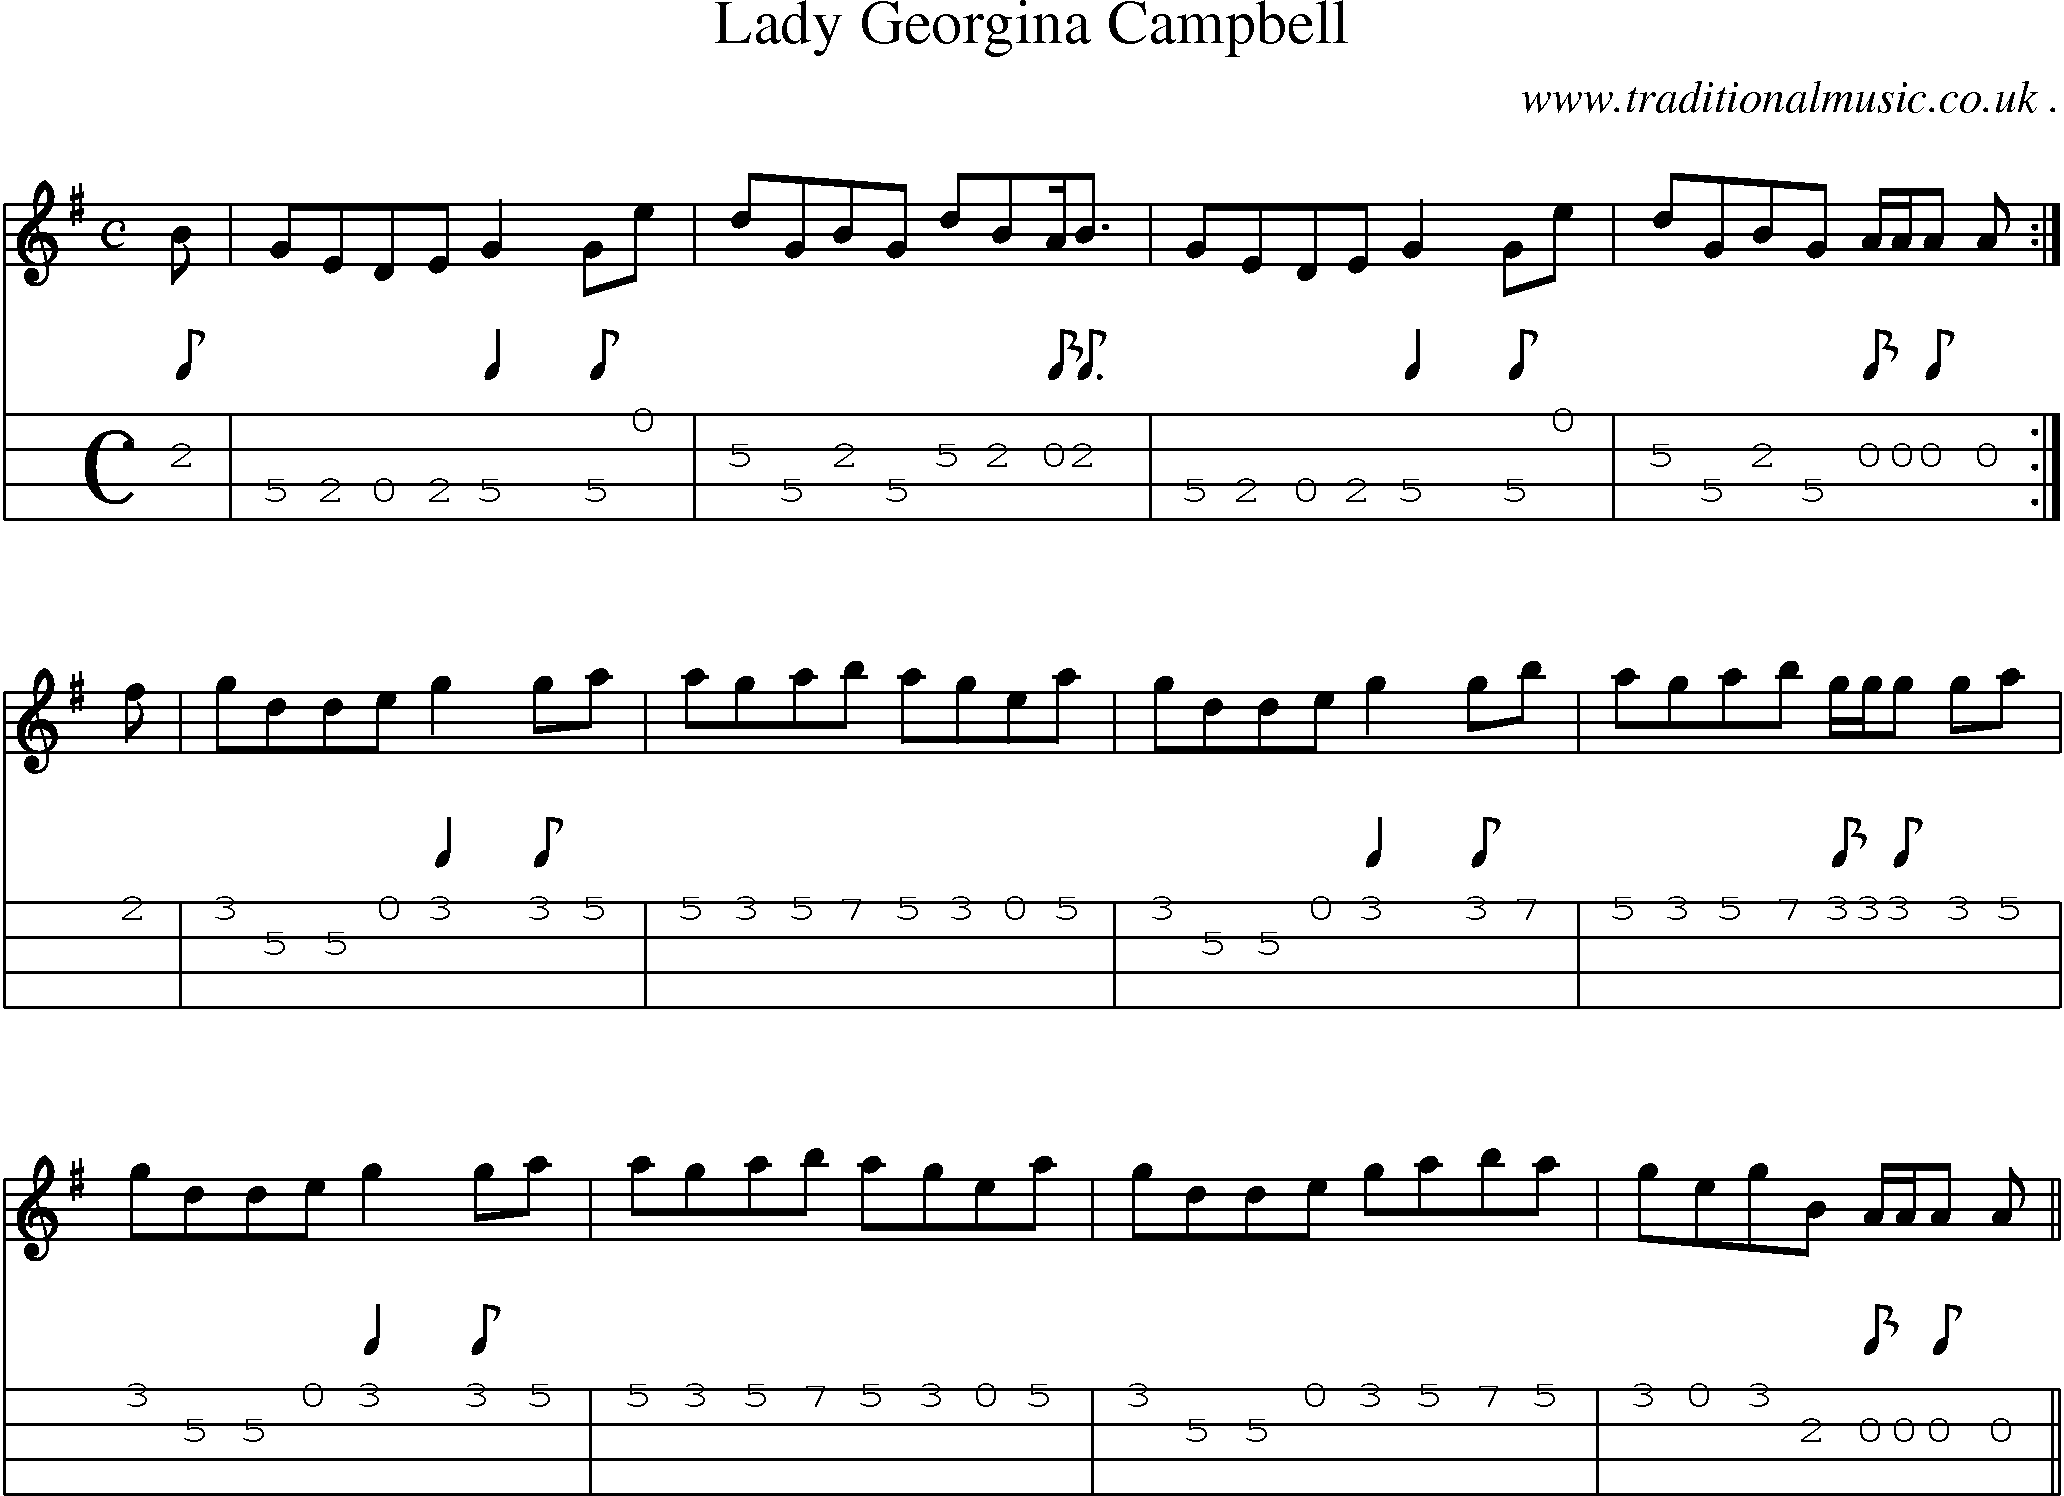 Sheet-music  score, Chords and Mandolin Tabs for Lady Georgina Campbell